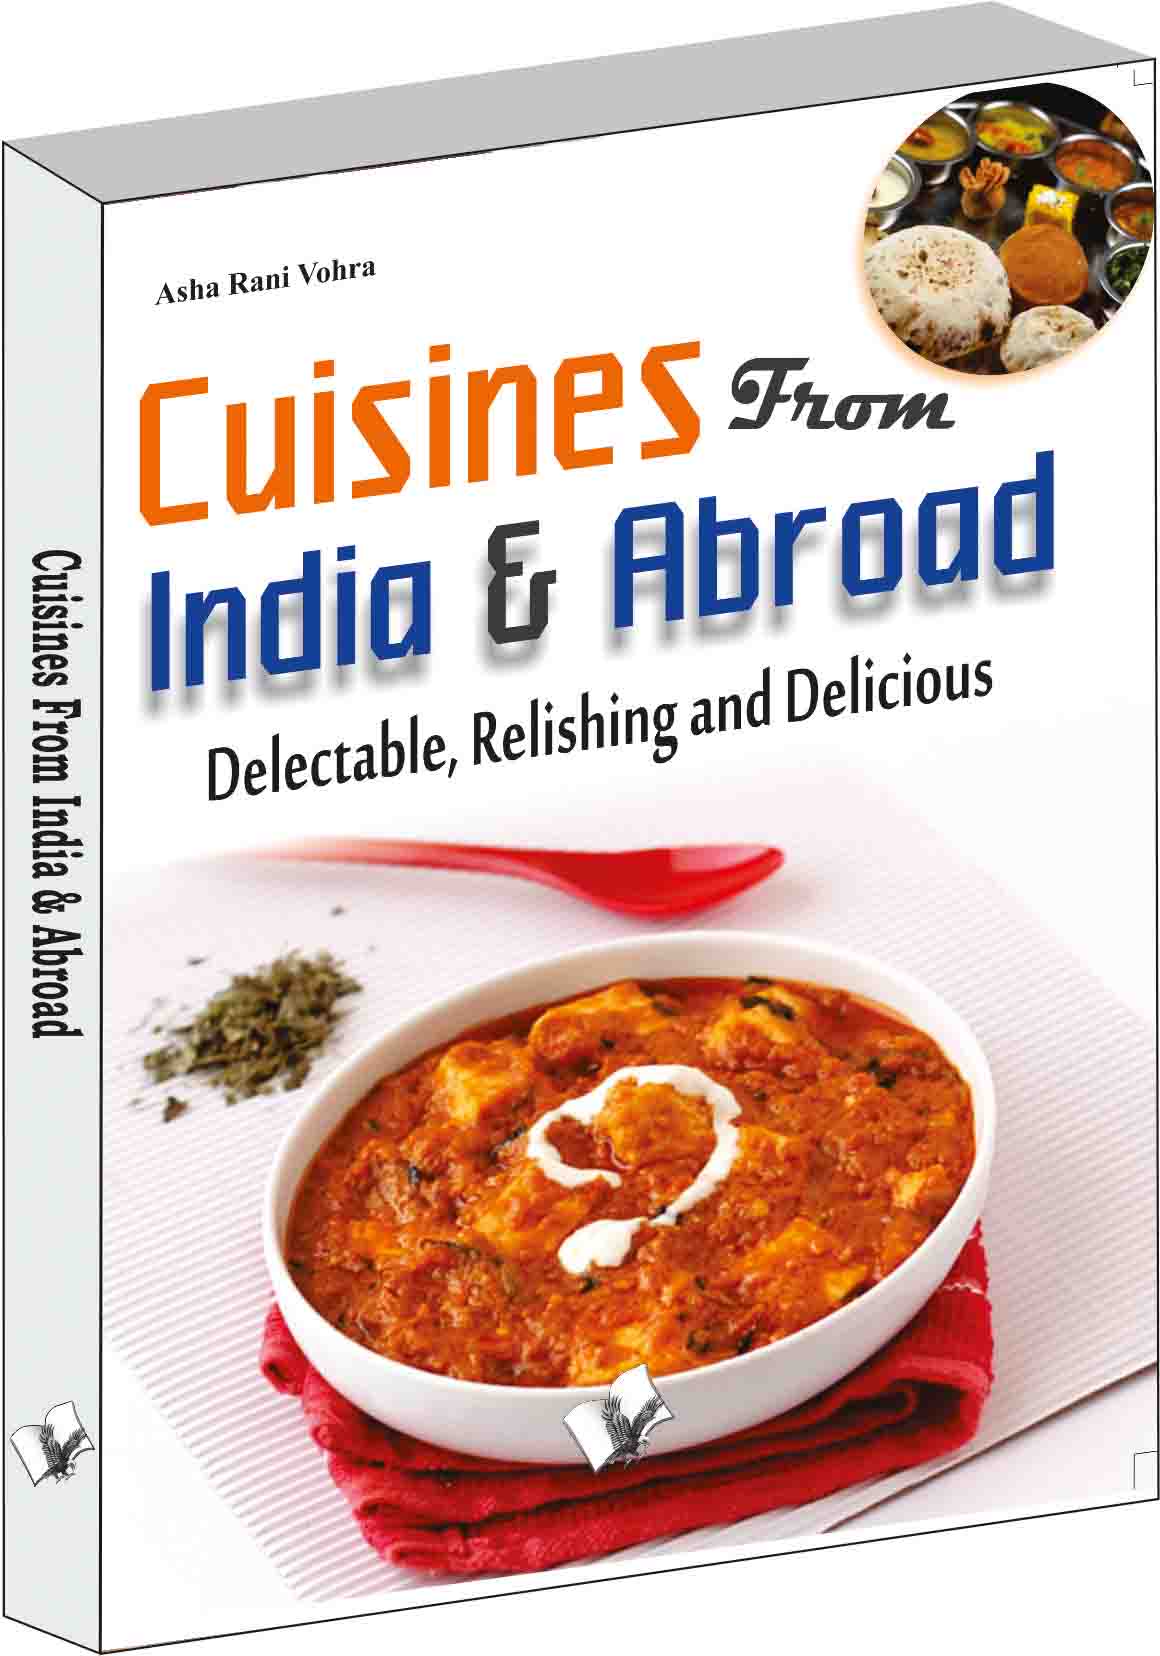 Cuisines from India & Abroad -Delectable, Relishing and Delicious